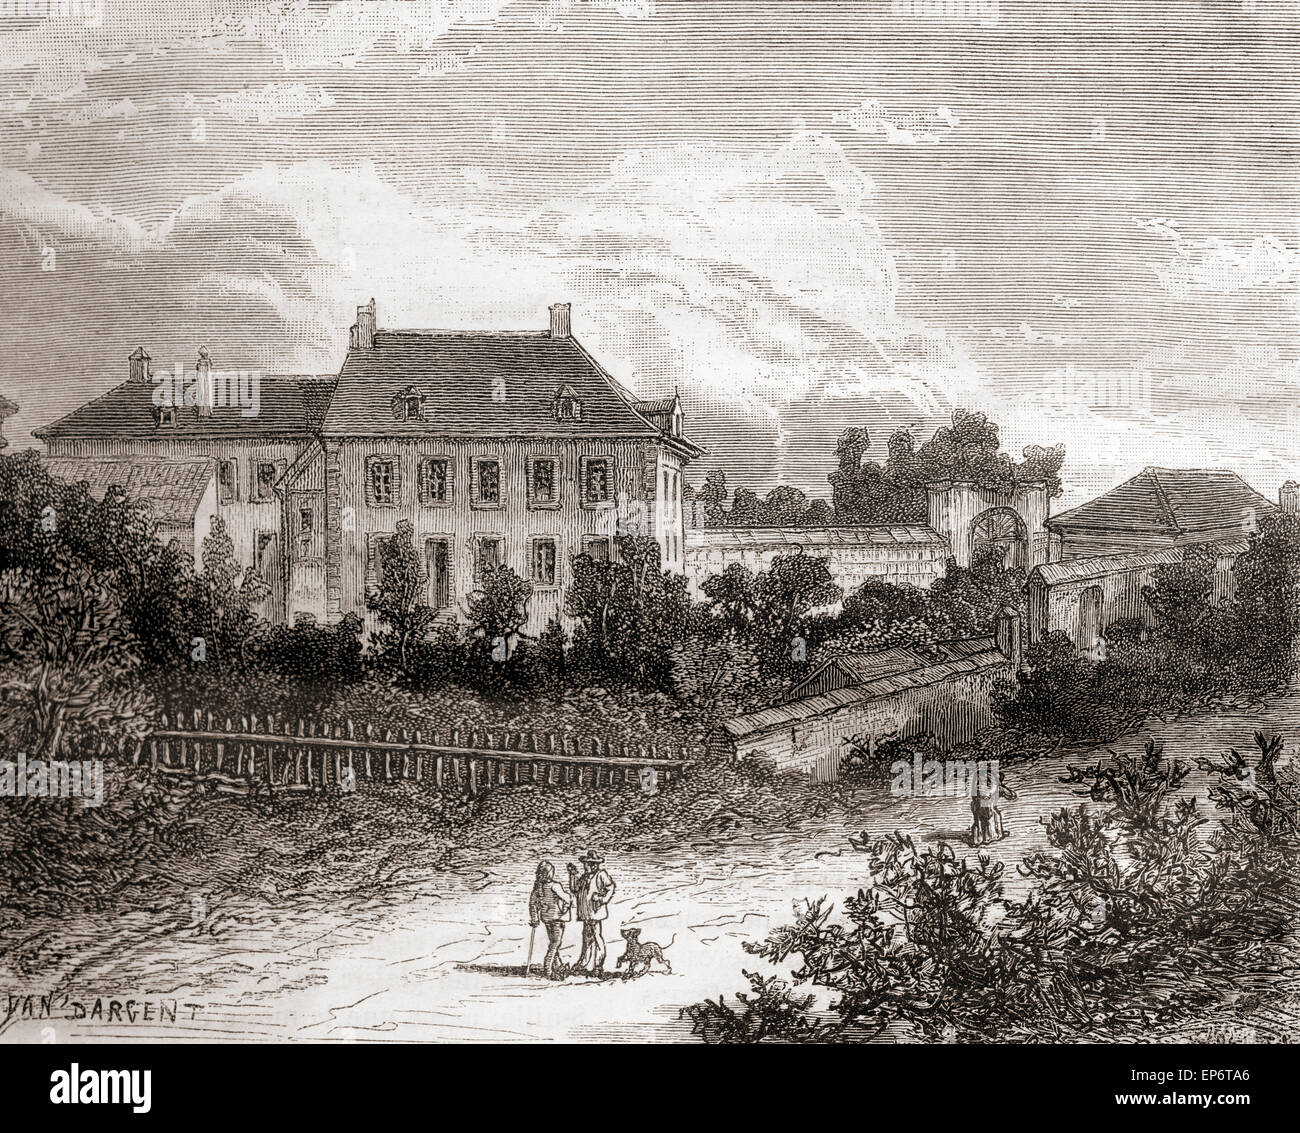 The house at Gras, near Chalon-sur-Saône, France where French inventor Nicephore Niepce developed heliography, a technique he used to create the world's oldest surviving product of a photographic process: a print made from a photoengraved printing plate in 1825. Stock Photo